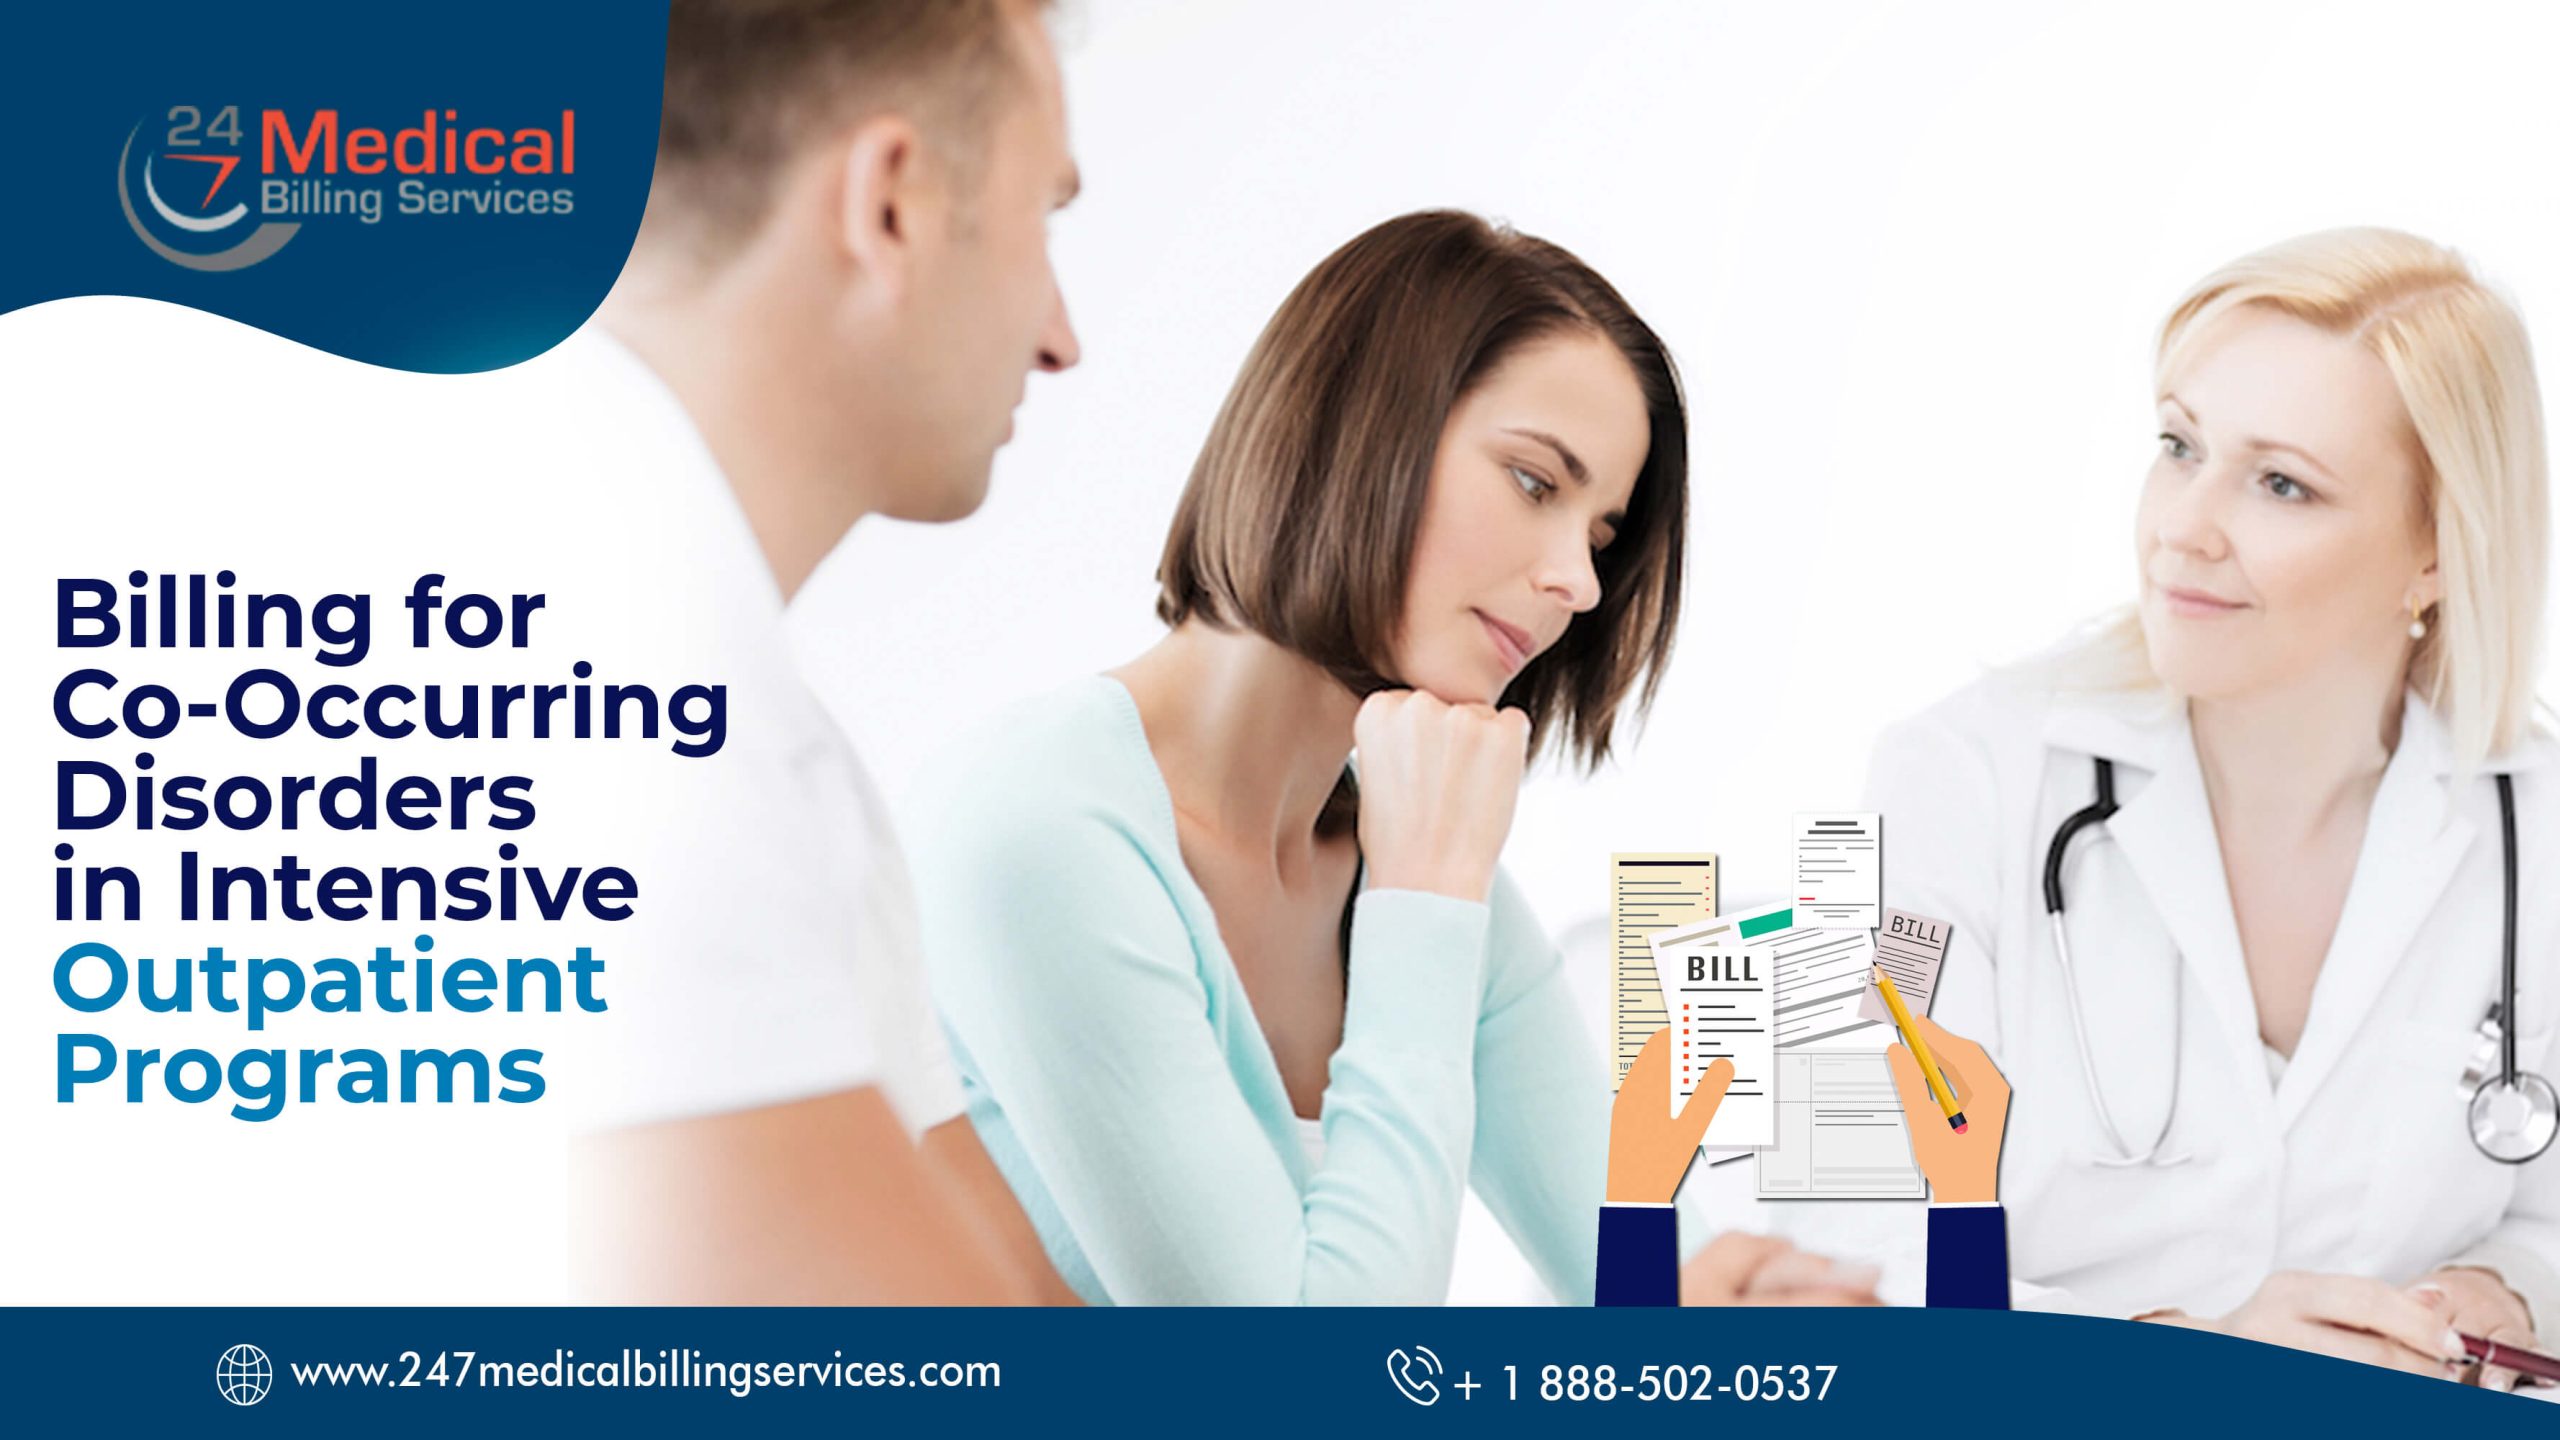  Billing for Co-Occurring Disorders in Intensive Outpatient Programs